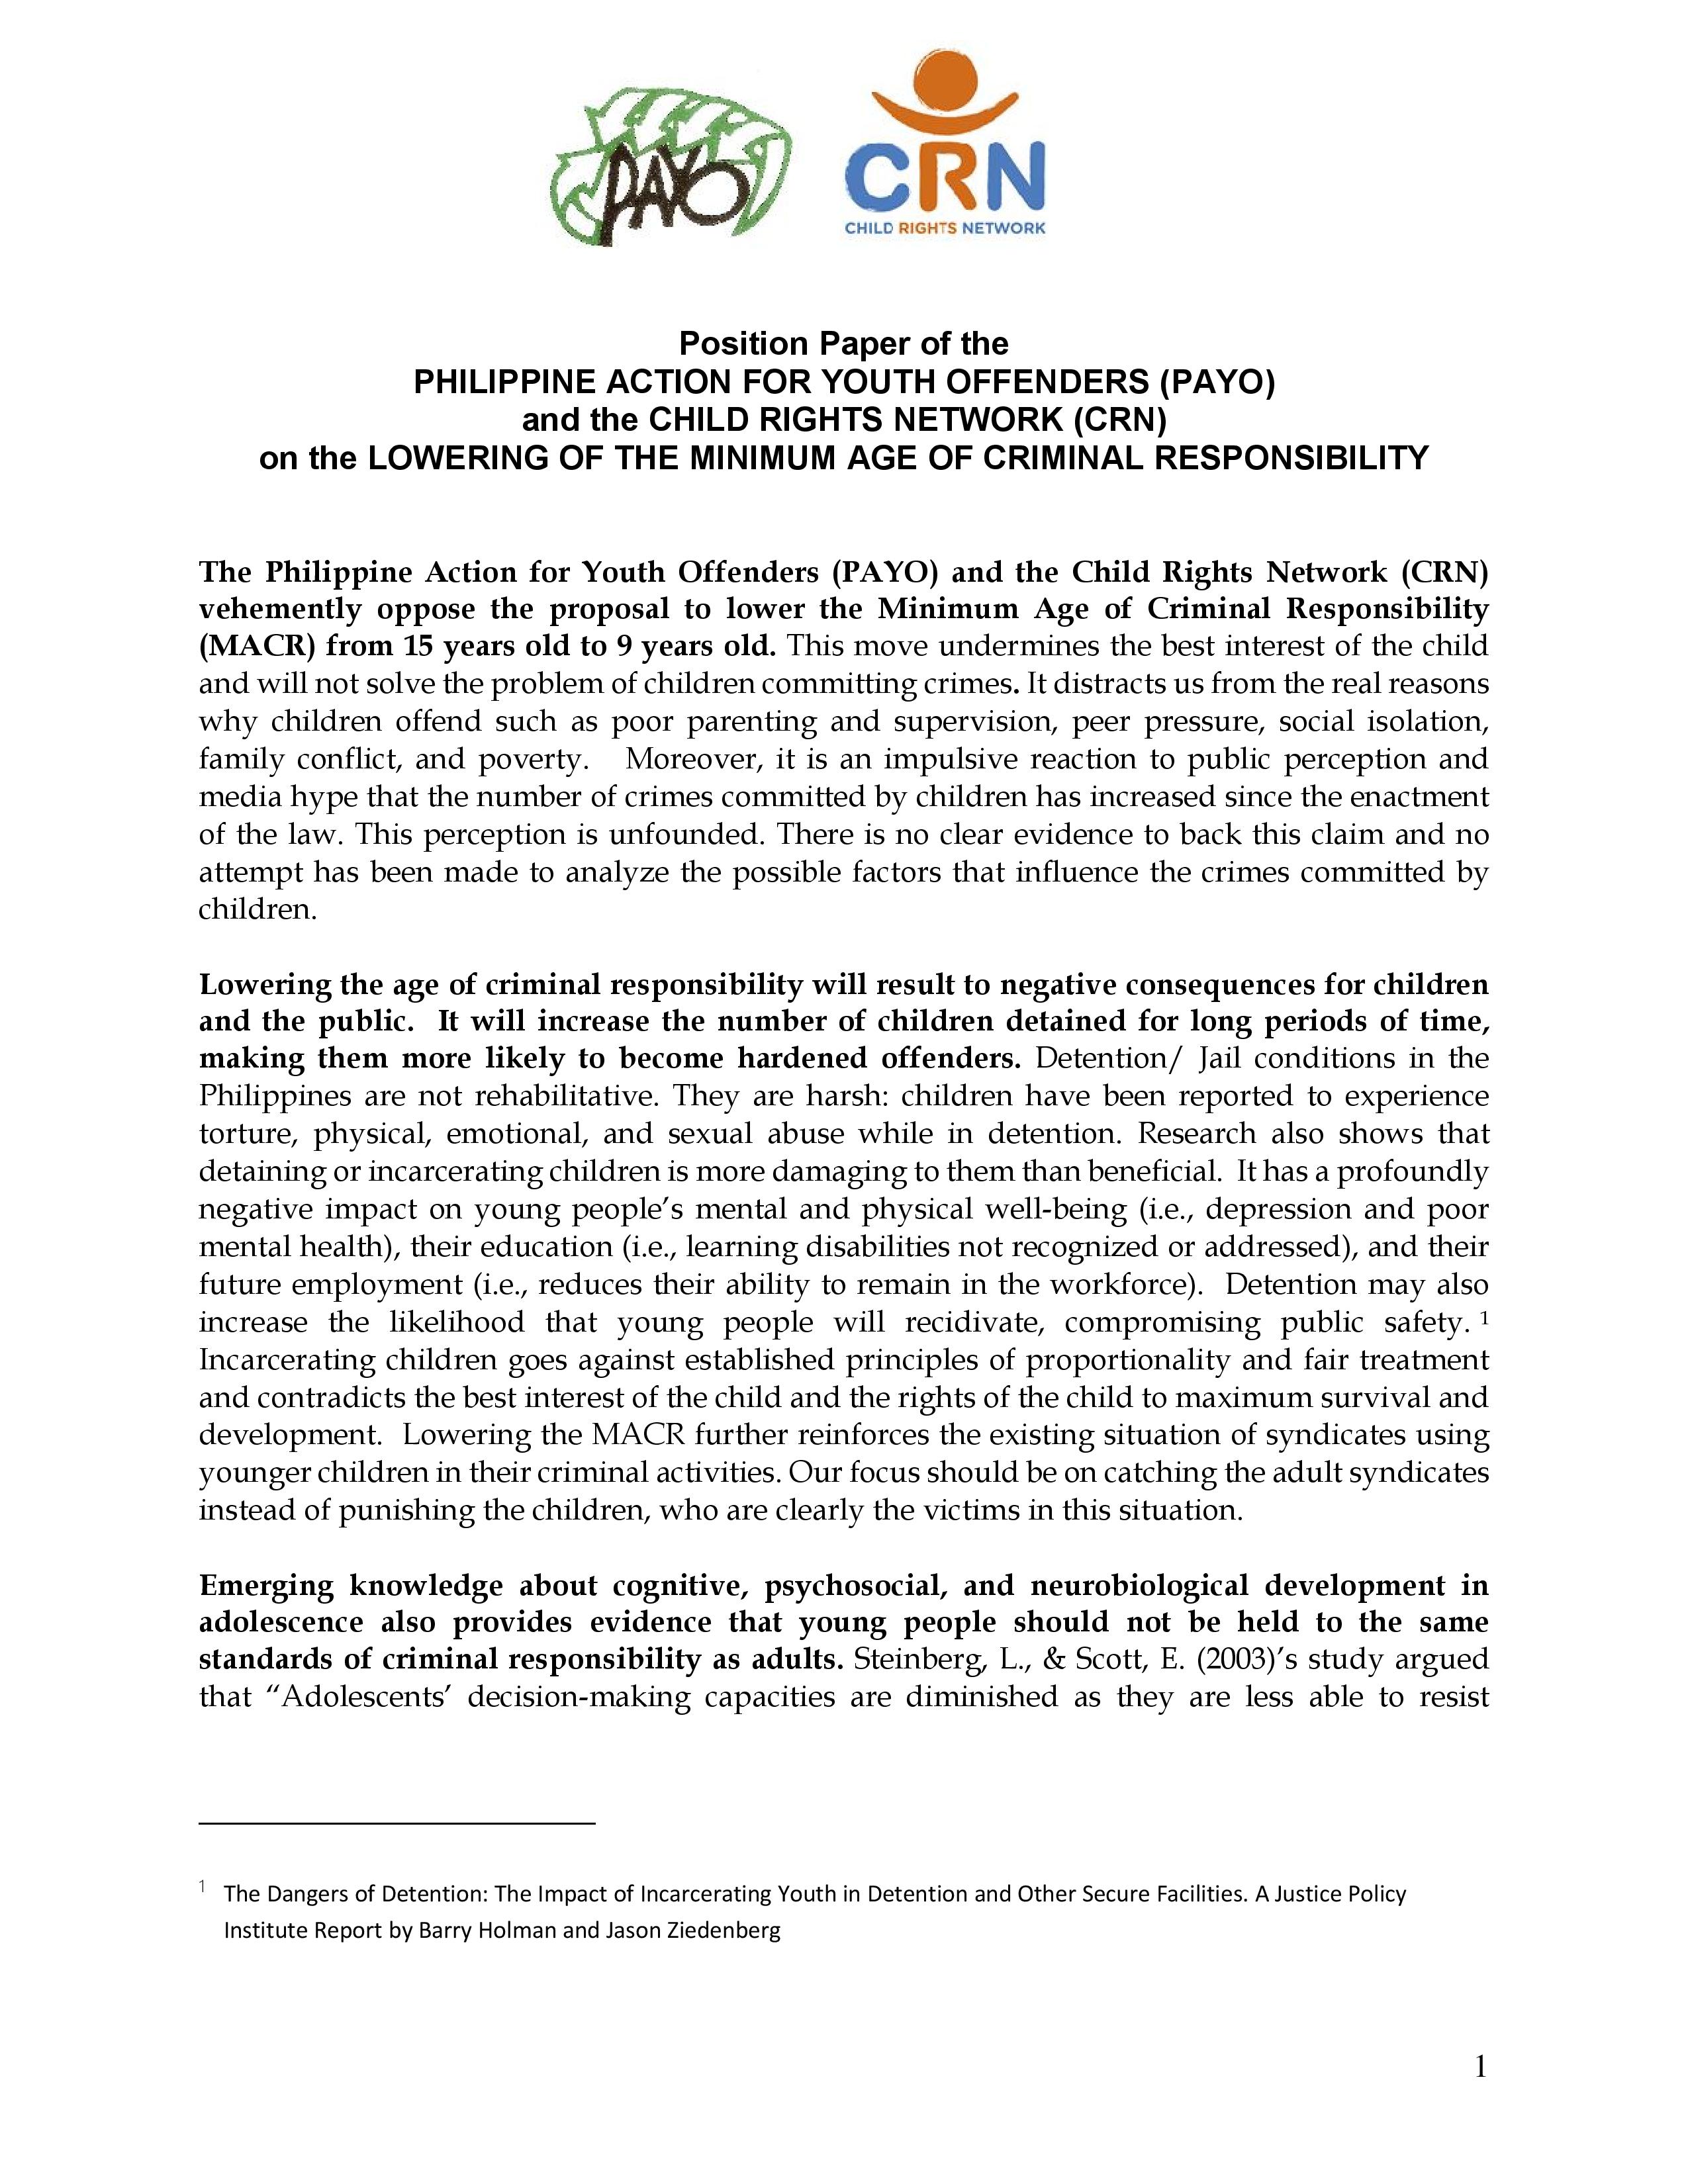 POSITION PAPER OF THE PHILIPPINE ACTION FOR YOUTH ...